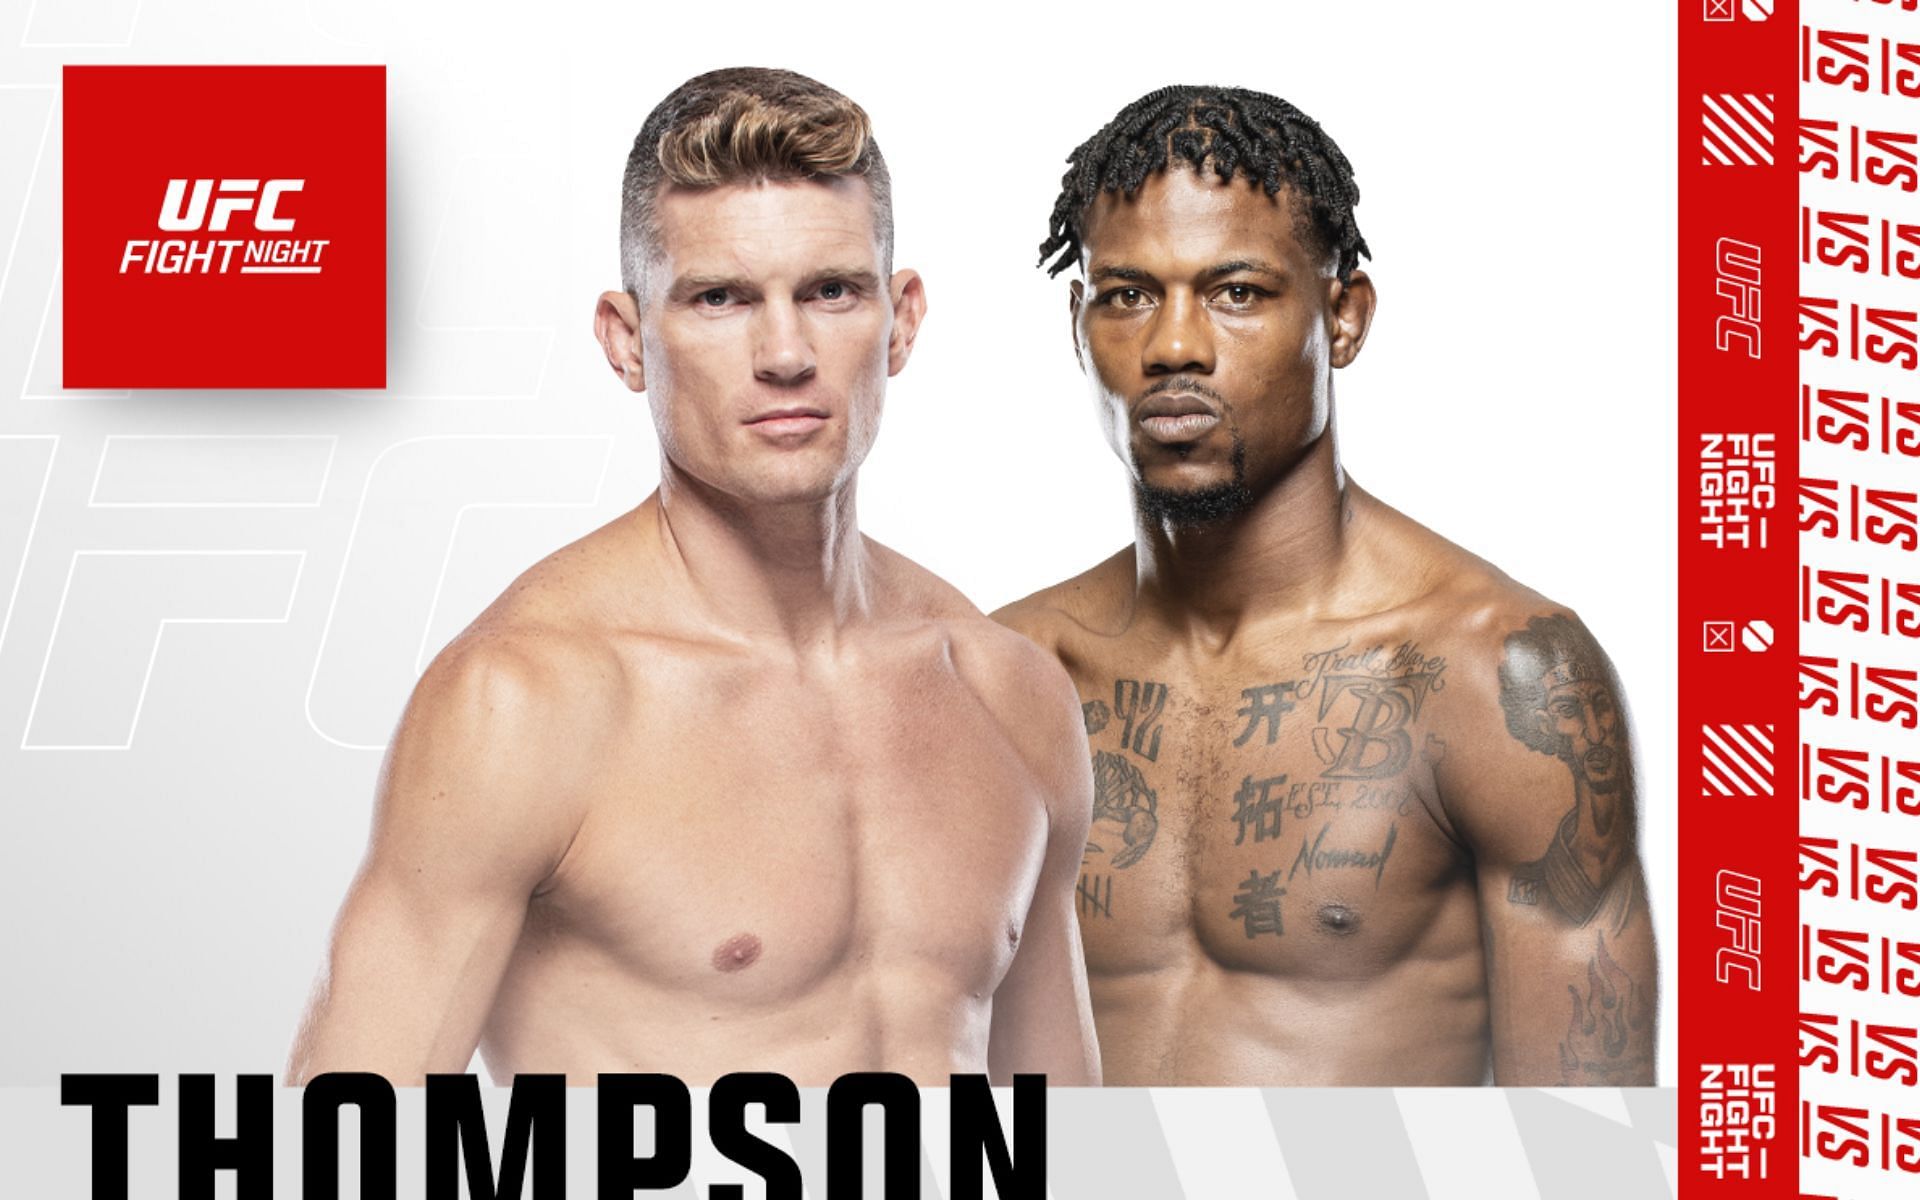 UFC Fight Night Orlando What is the latest fight card?